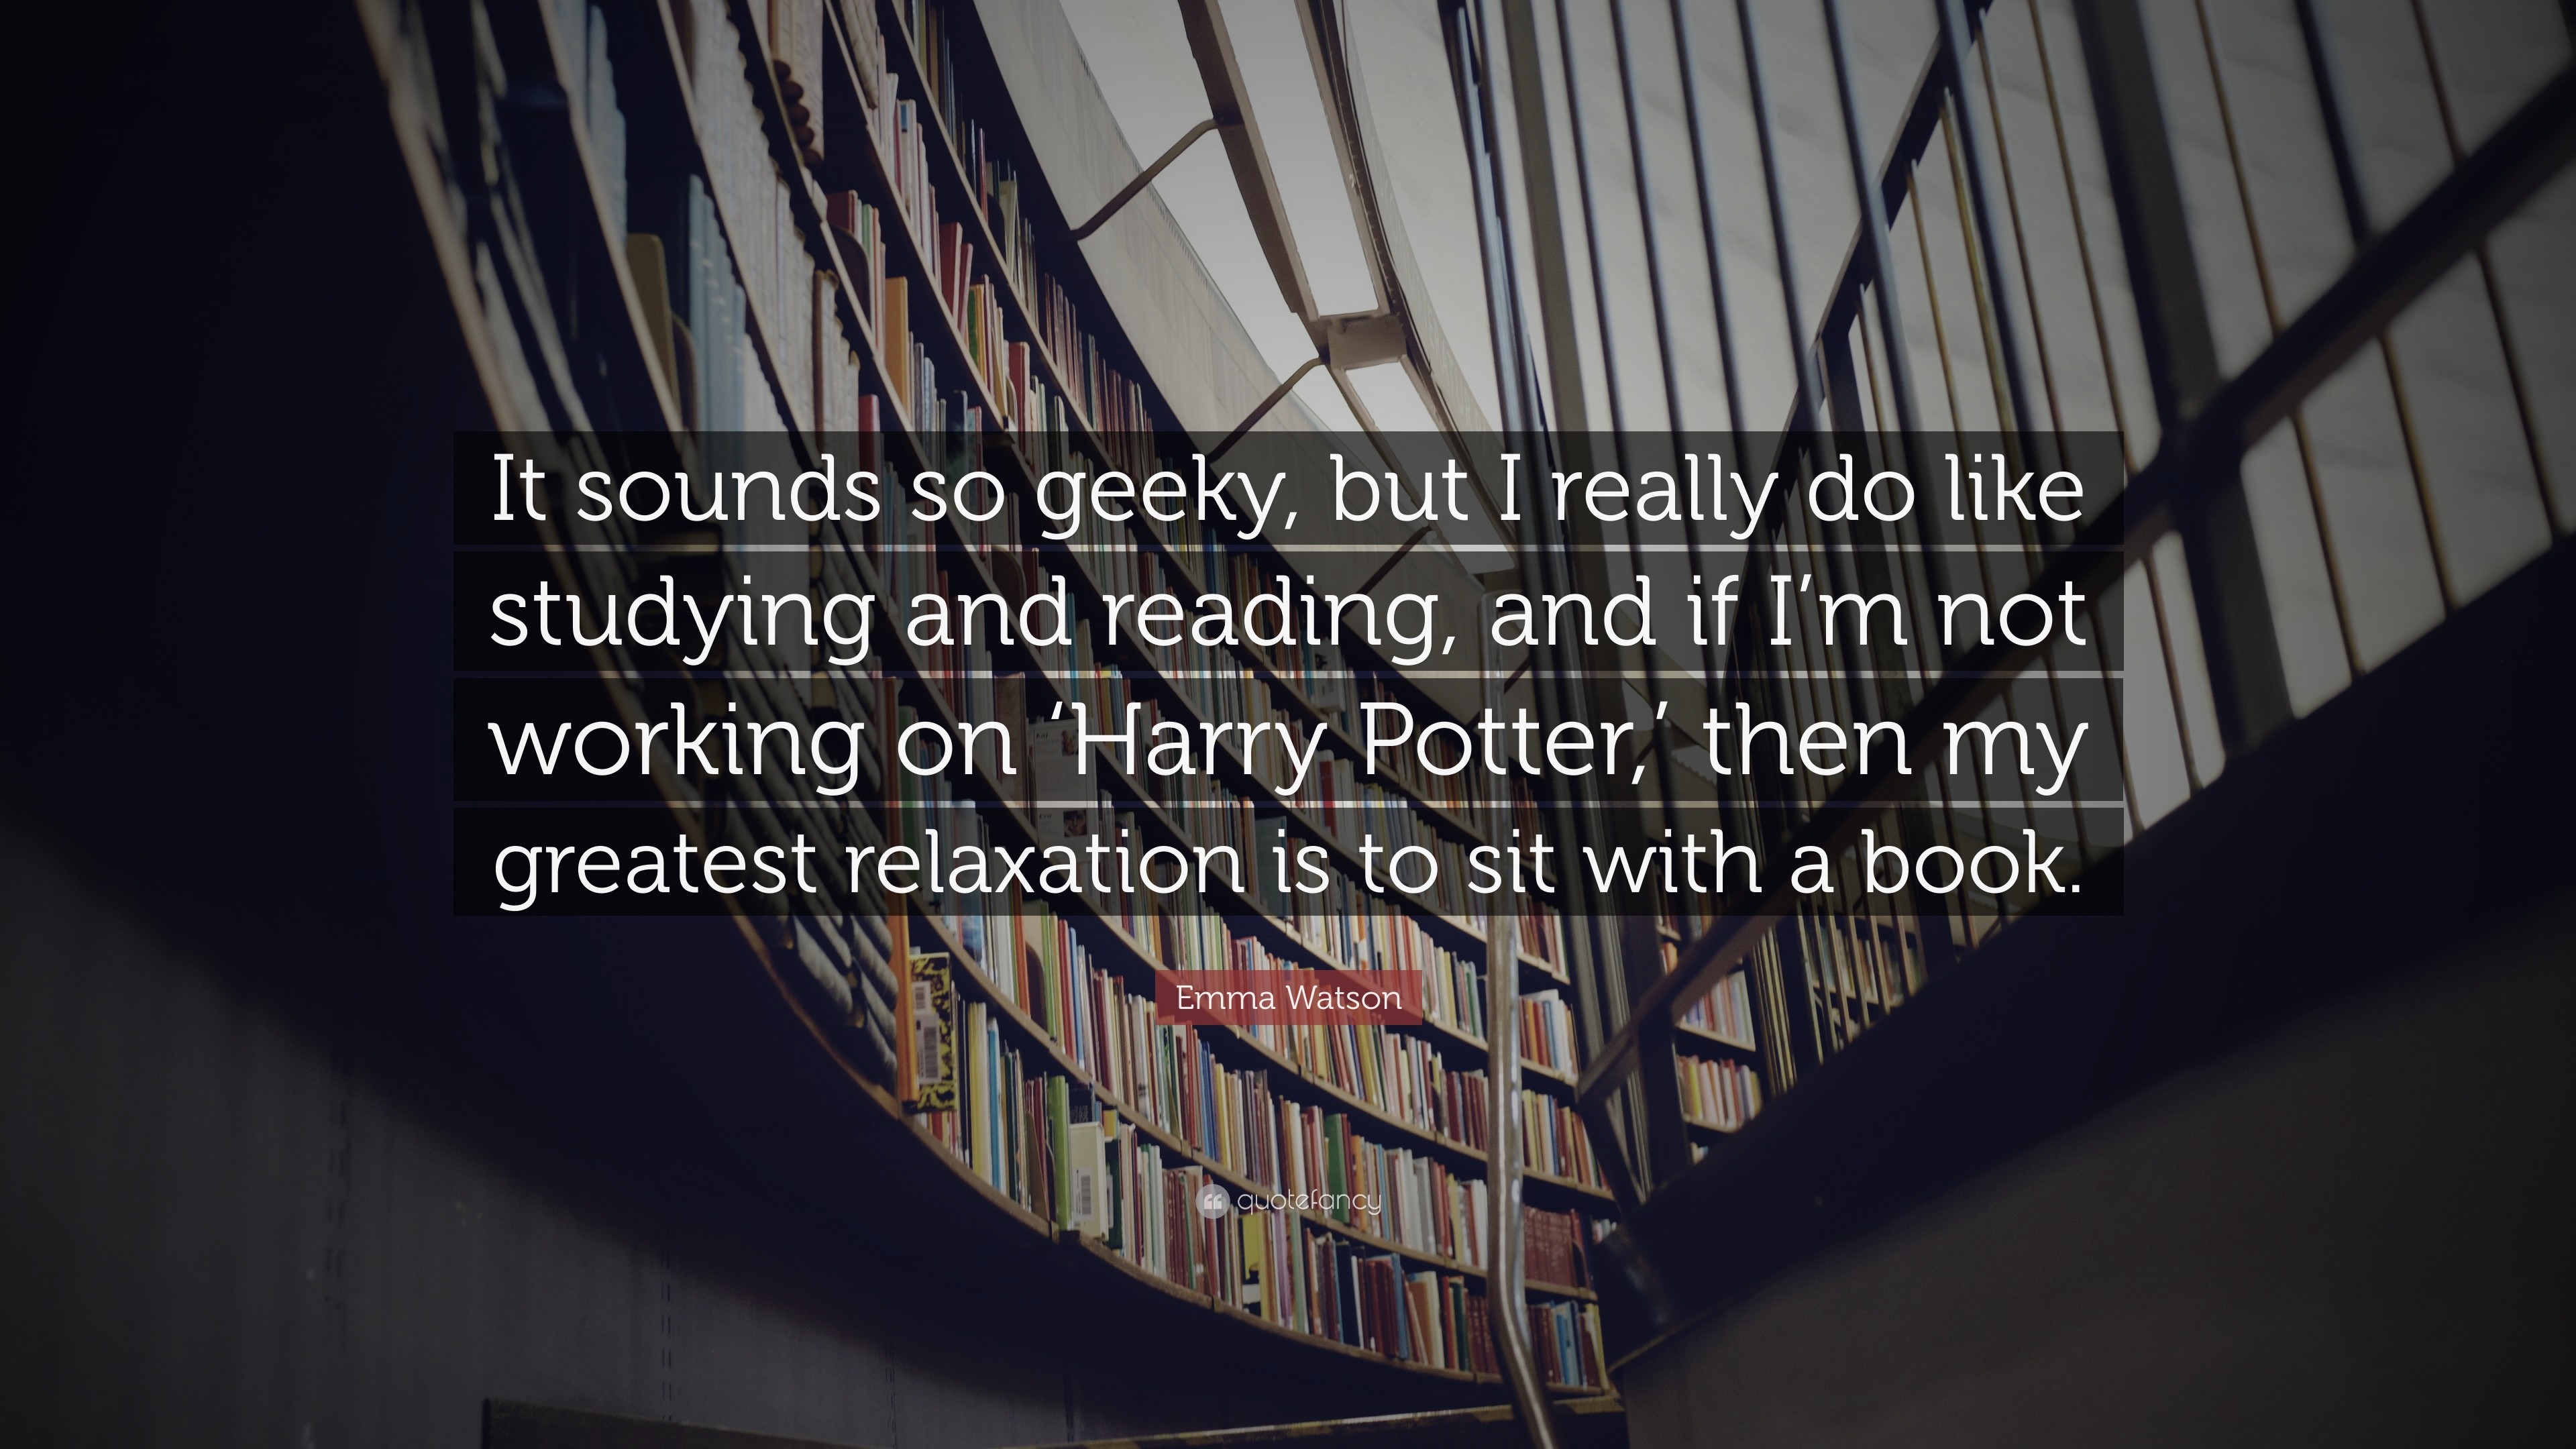 3840x2160 Emma Watson Quote: “It sounds so geeky, but I really do like studying